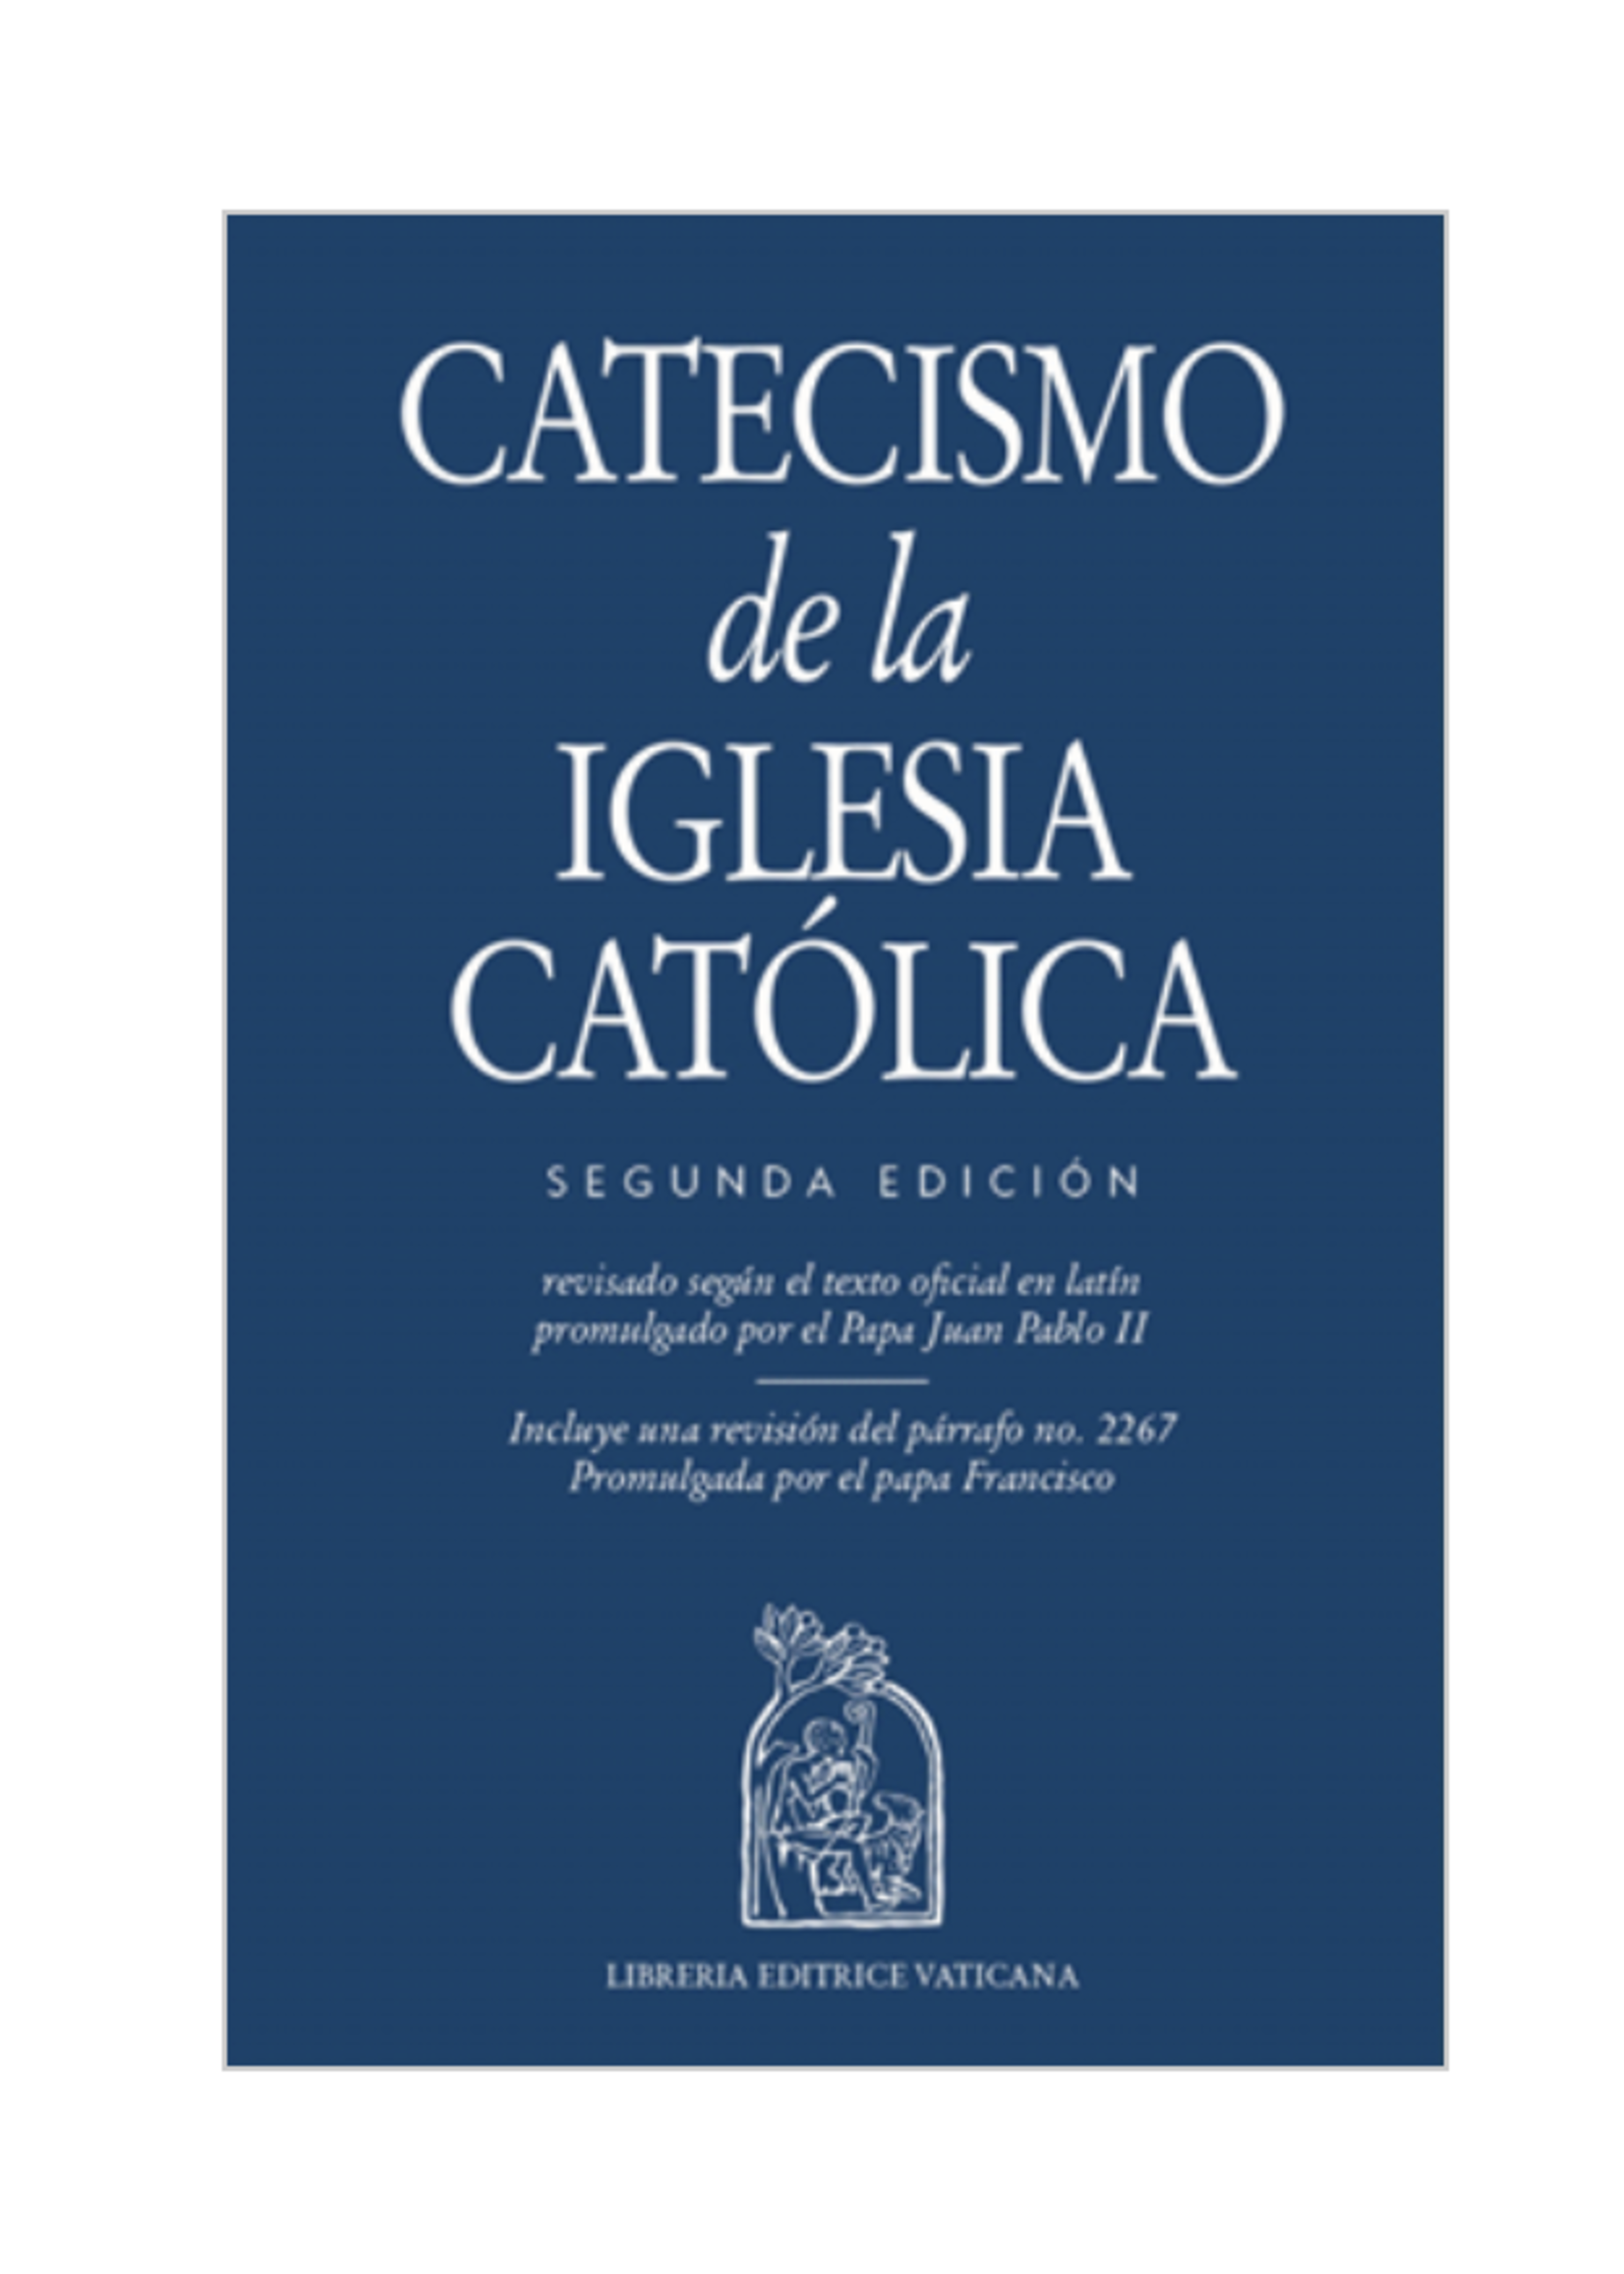 Catechism of the Catholic Church, Spanish Updated Edition